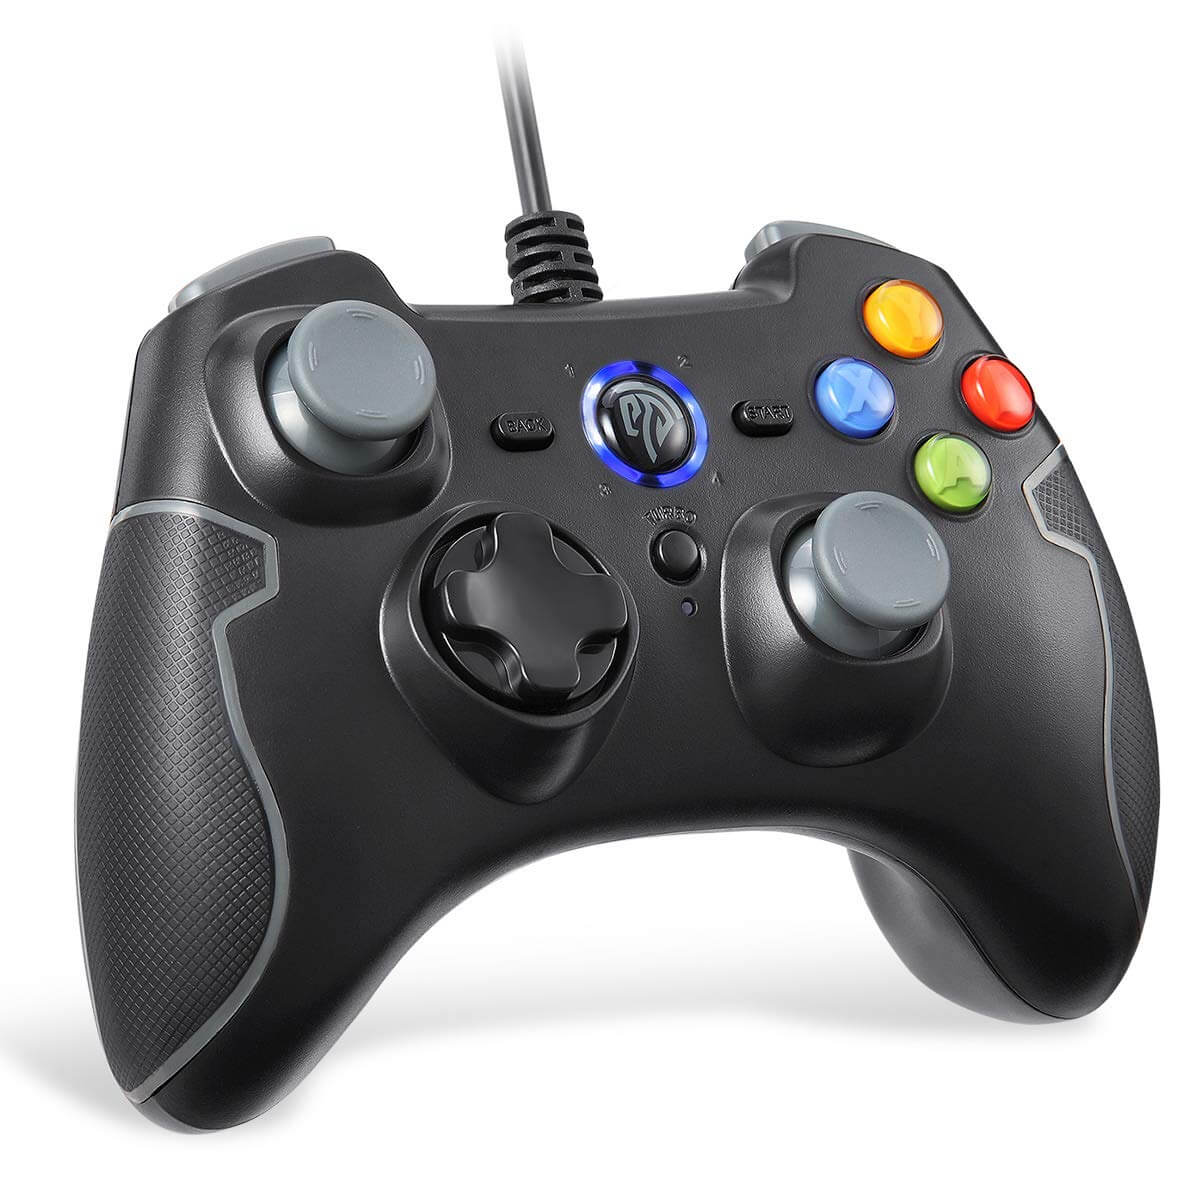 Download 10 Best Game Controller For PC in 2020